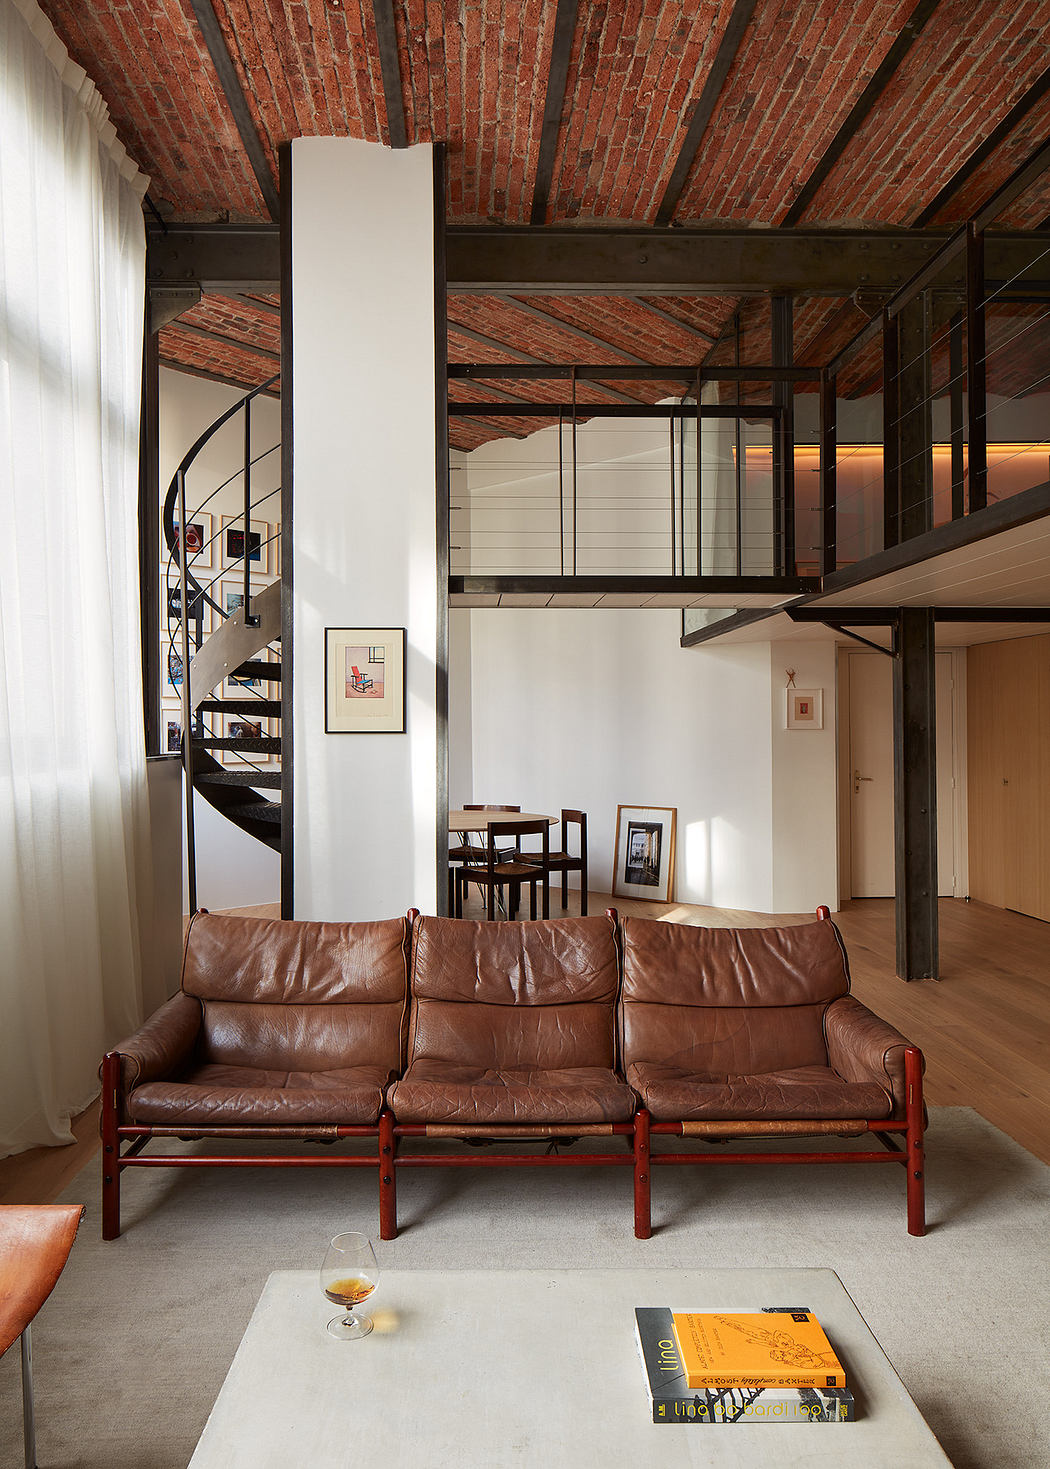 Modern loft interior with exposed brick, spiral staircase, and leather sofa.